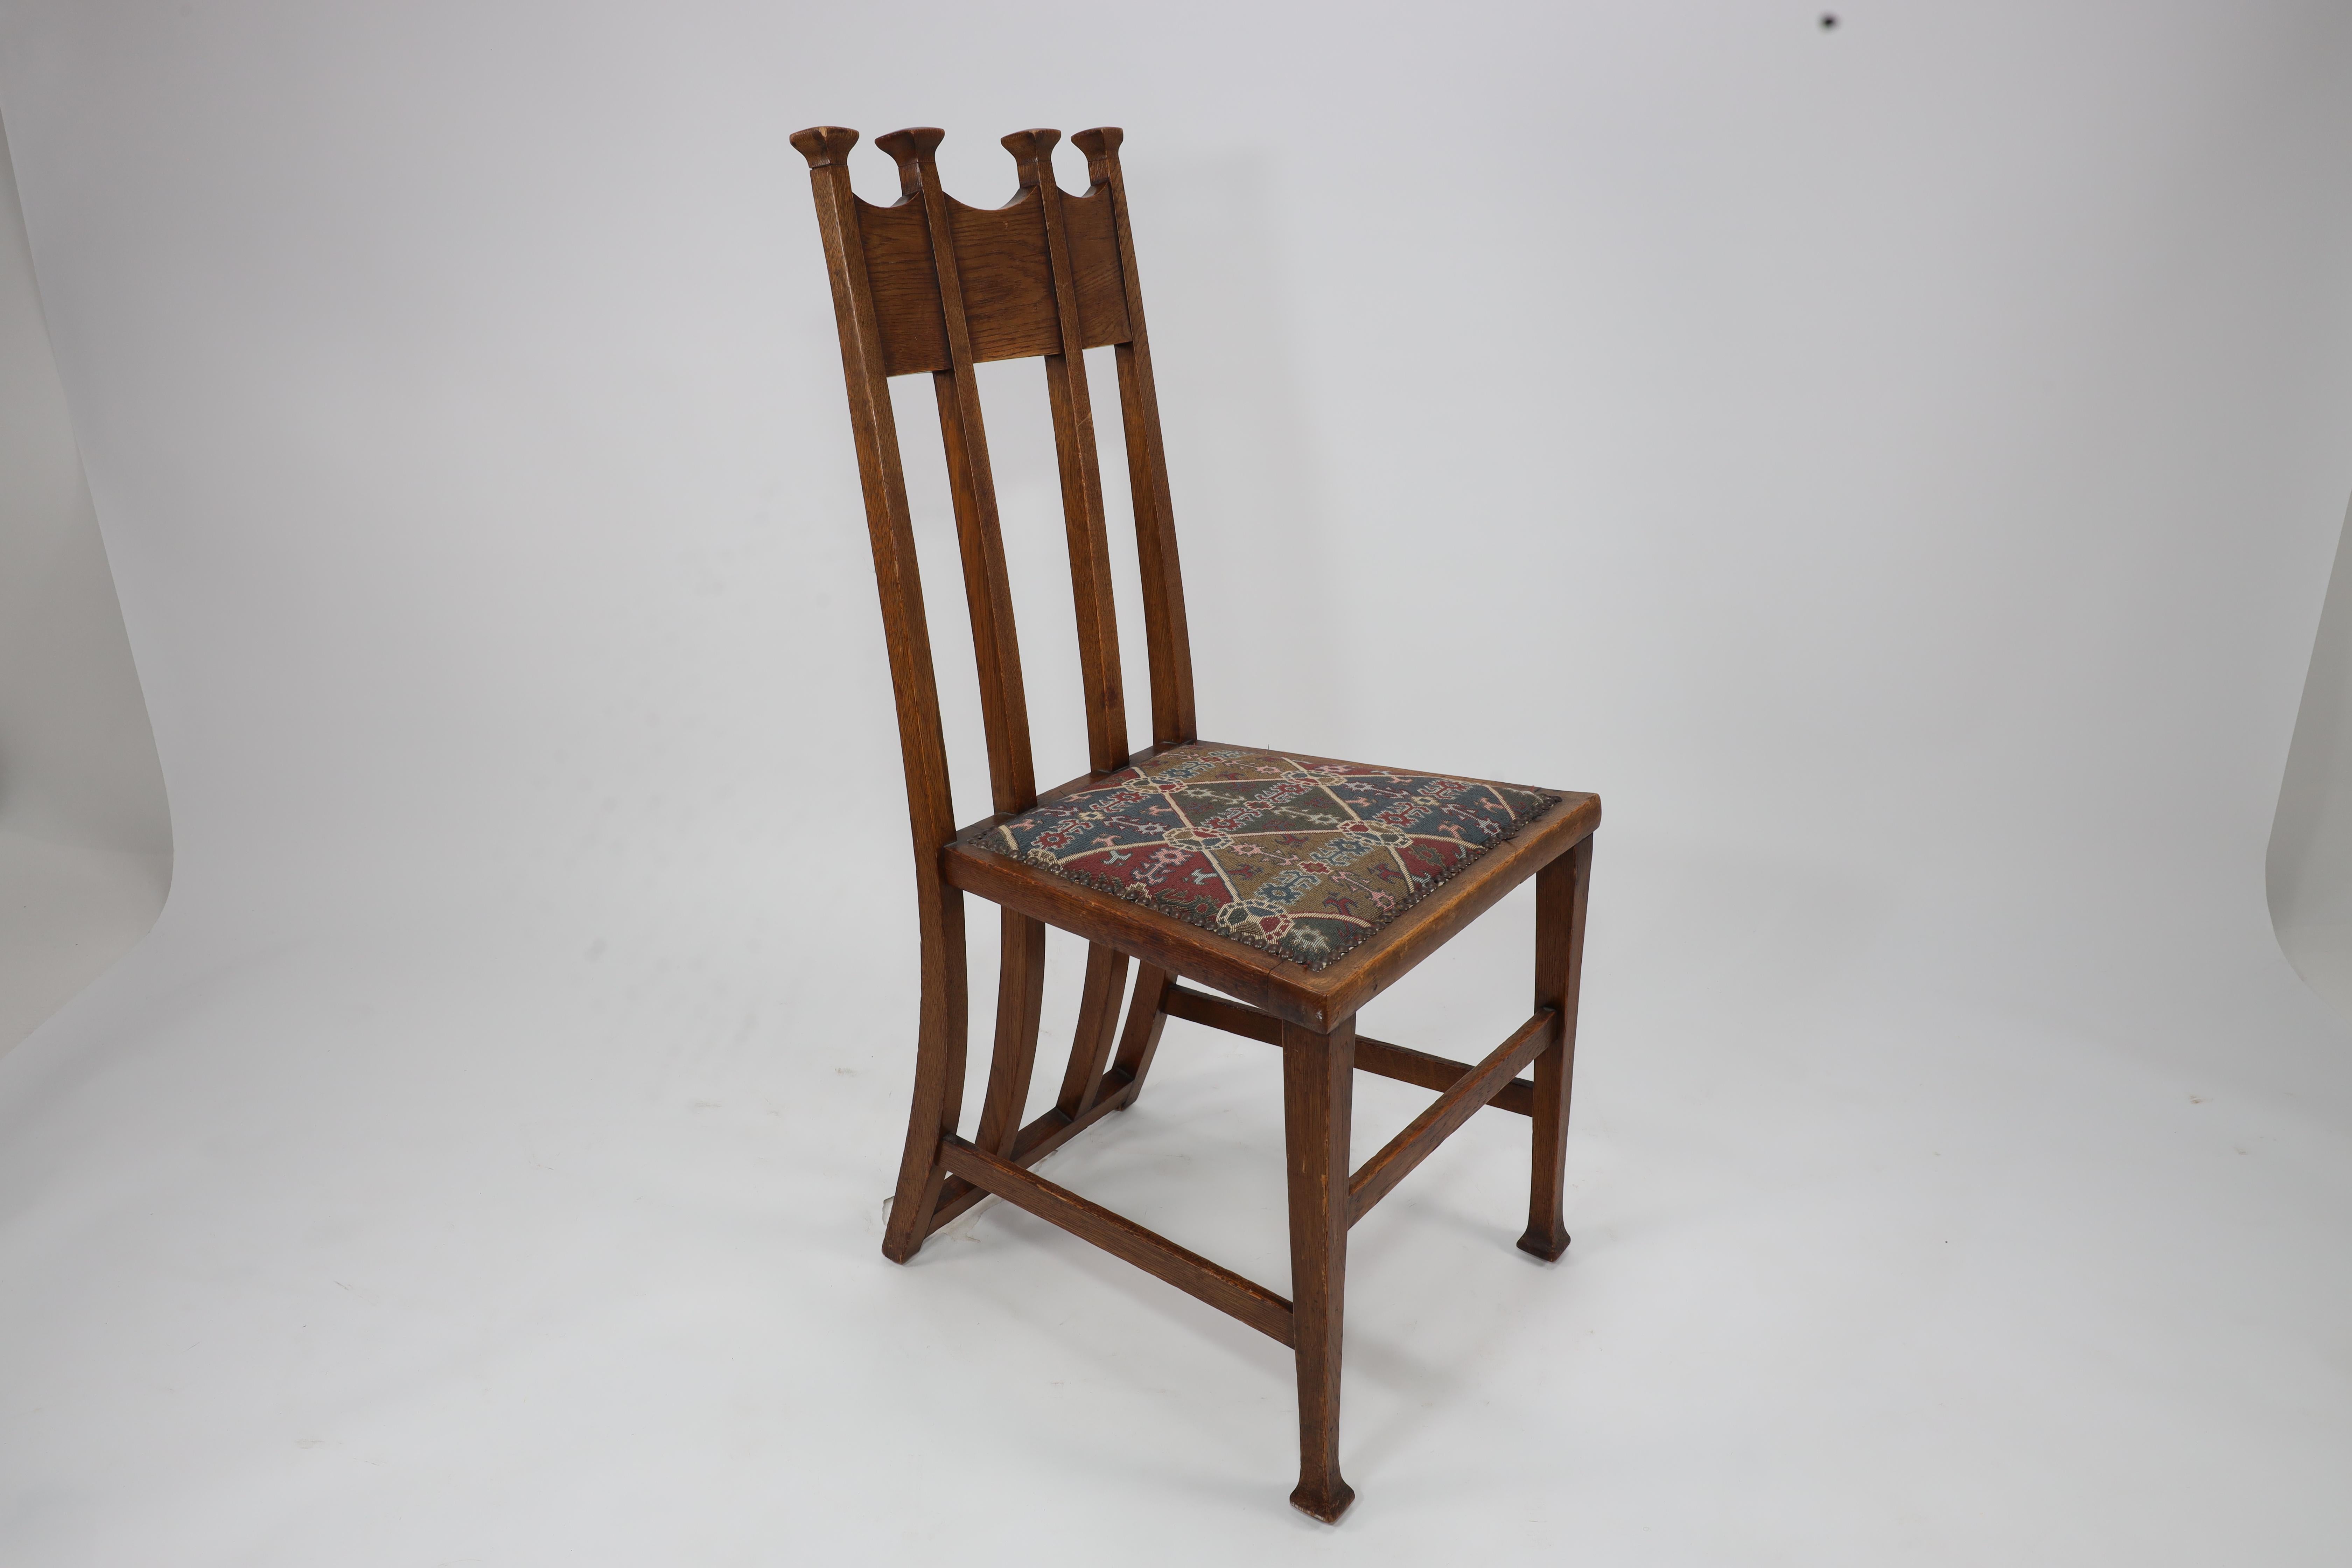 George Montague Ellwood. Made by J S Henry.
A rare set of eight Arts and Crafts oak dining chairs and two armchairs with throne like capped tops and wonderful full sweeping back supports, with tactile knops to the curvacious arms on slender opposite